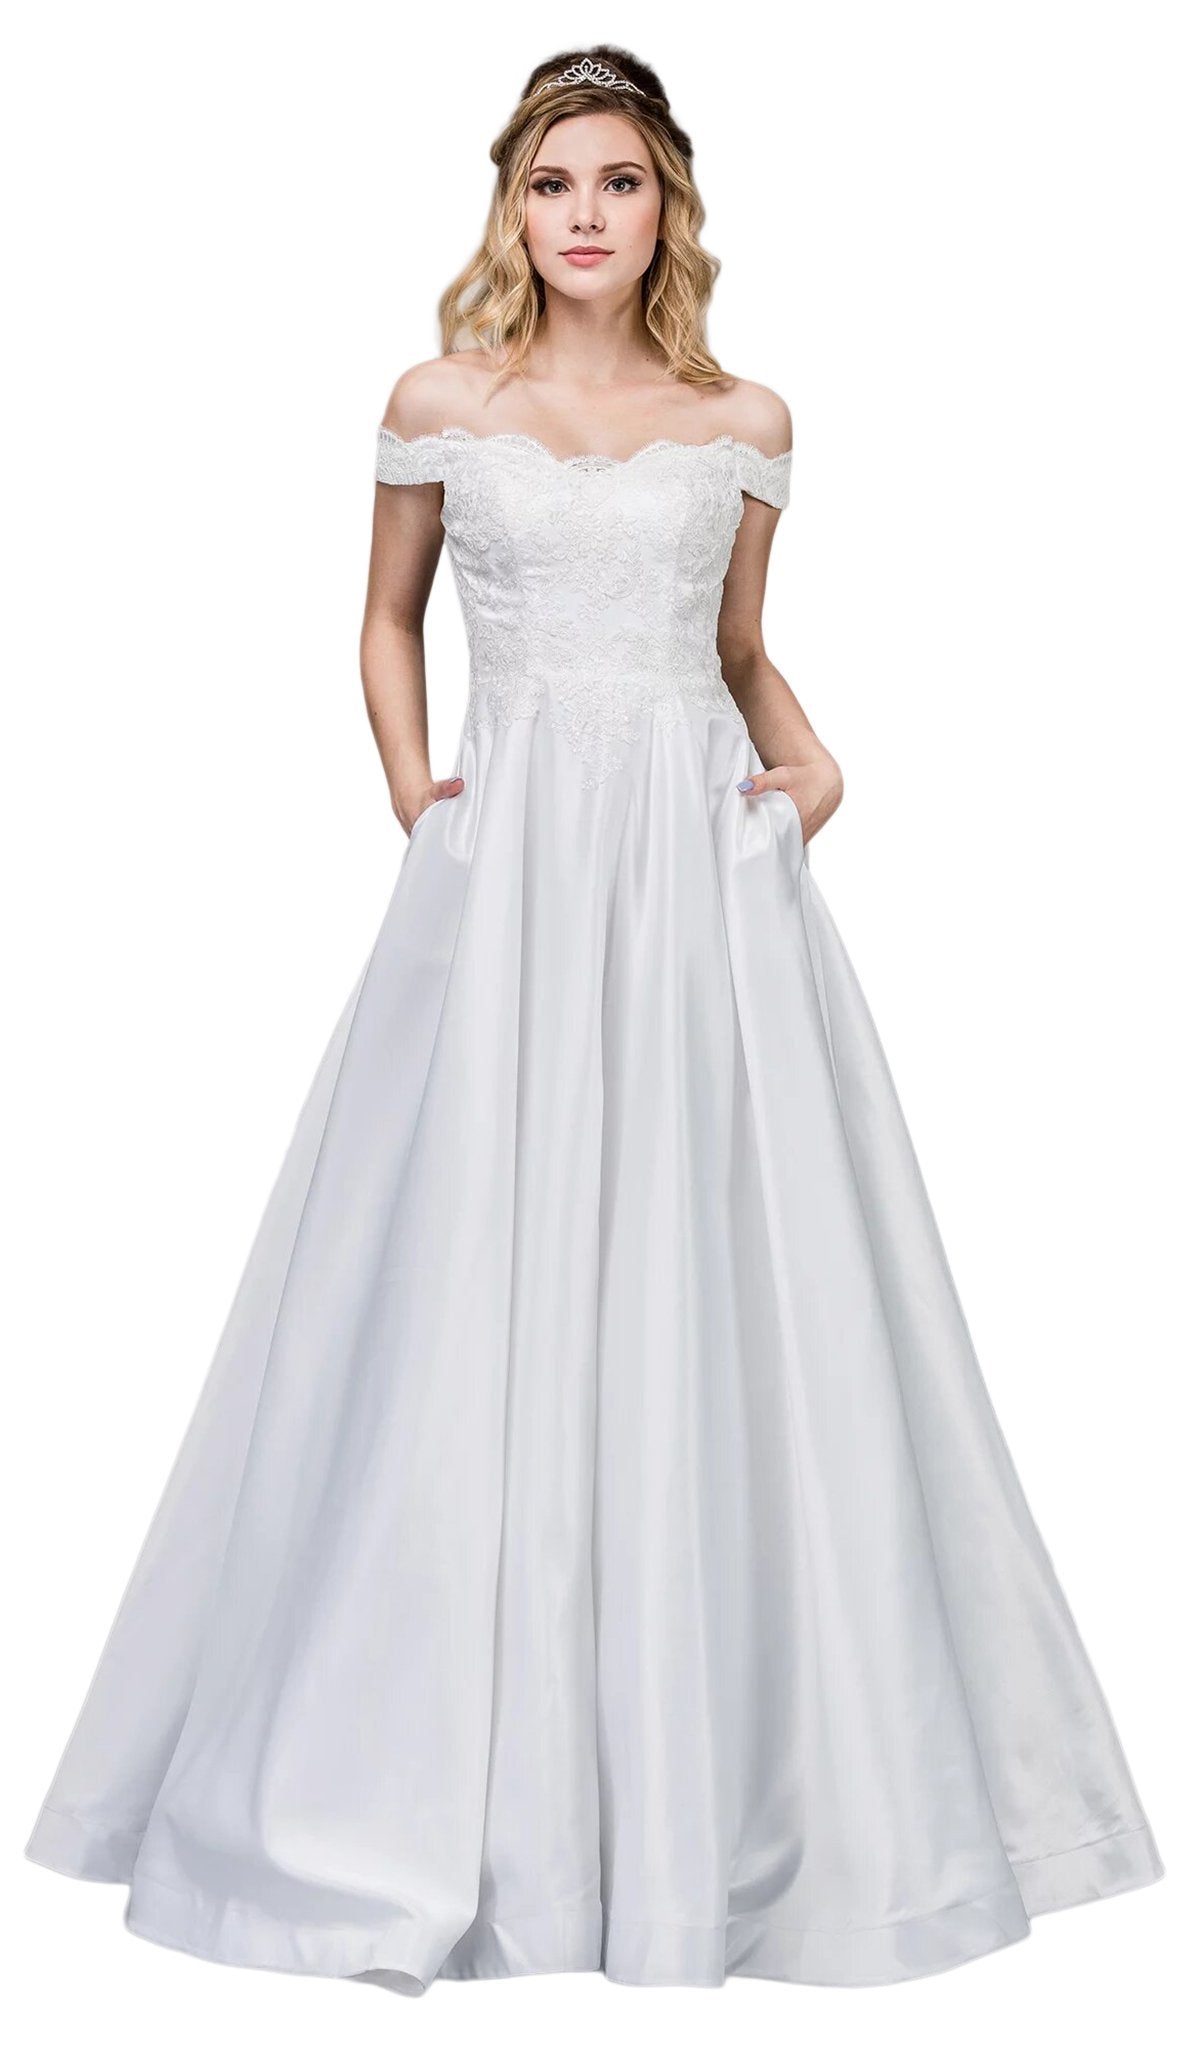 Dancing Queen - 61 Scallop Lace Applique Off-Shoulder A-line Gown In White